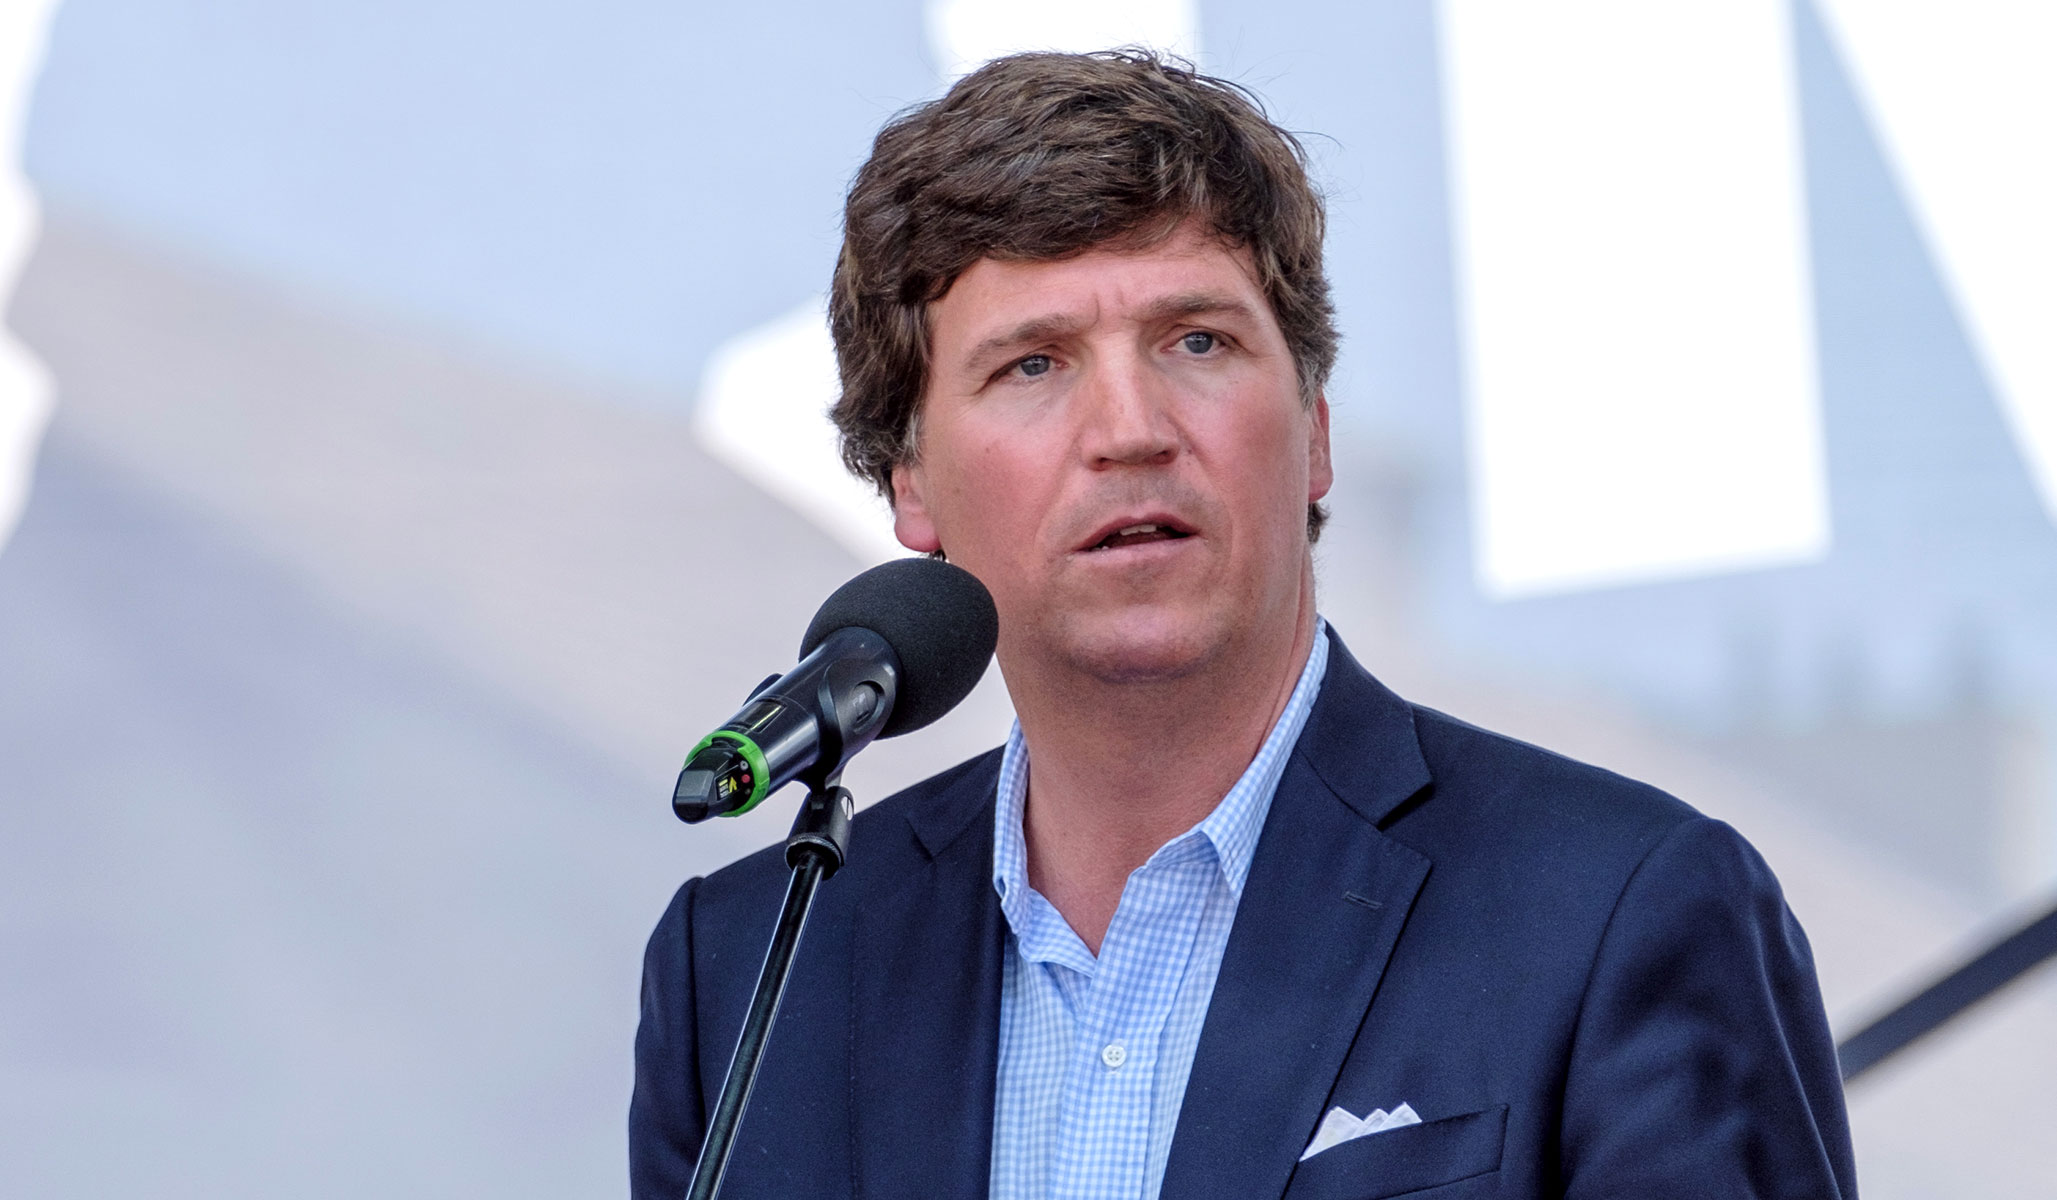 Tucker Carlson's Show to Relaunch on Twitter | National Review ...